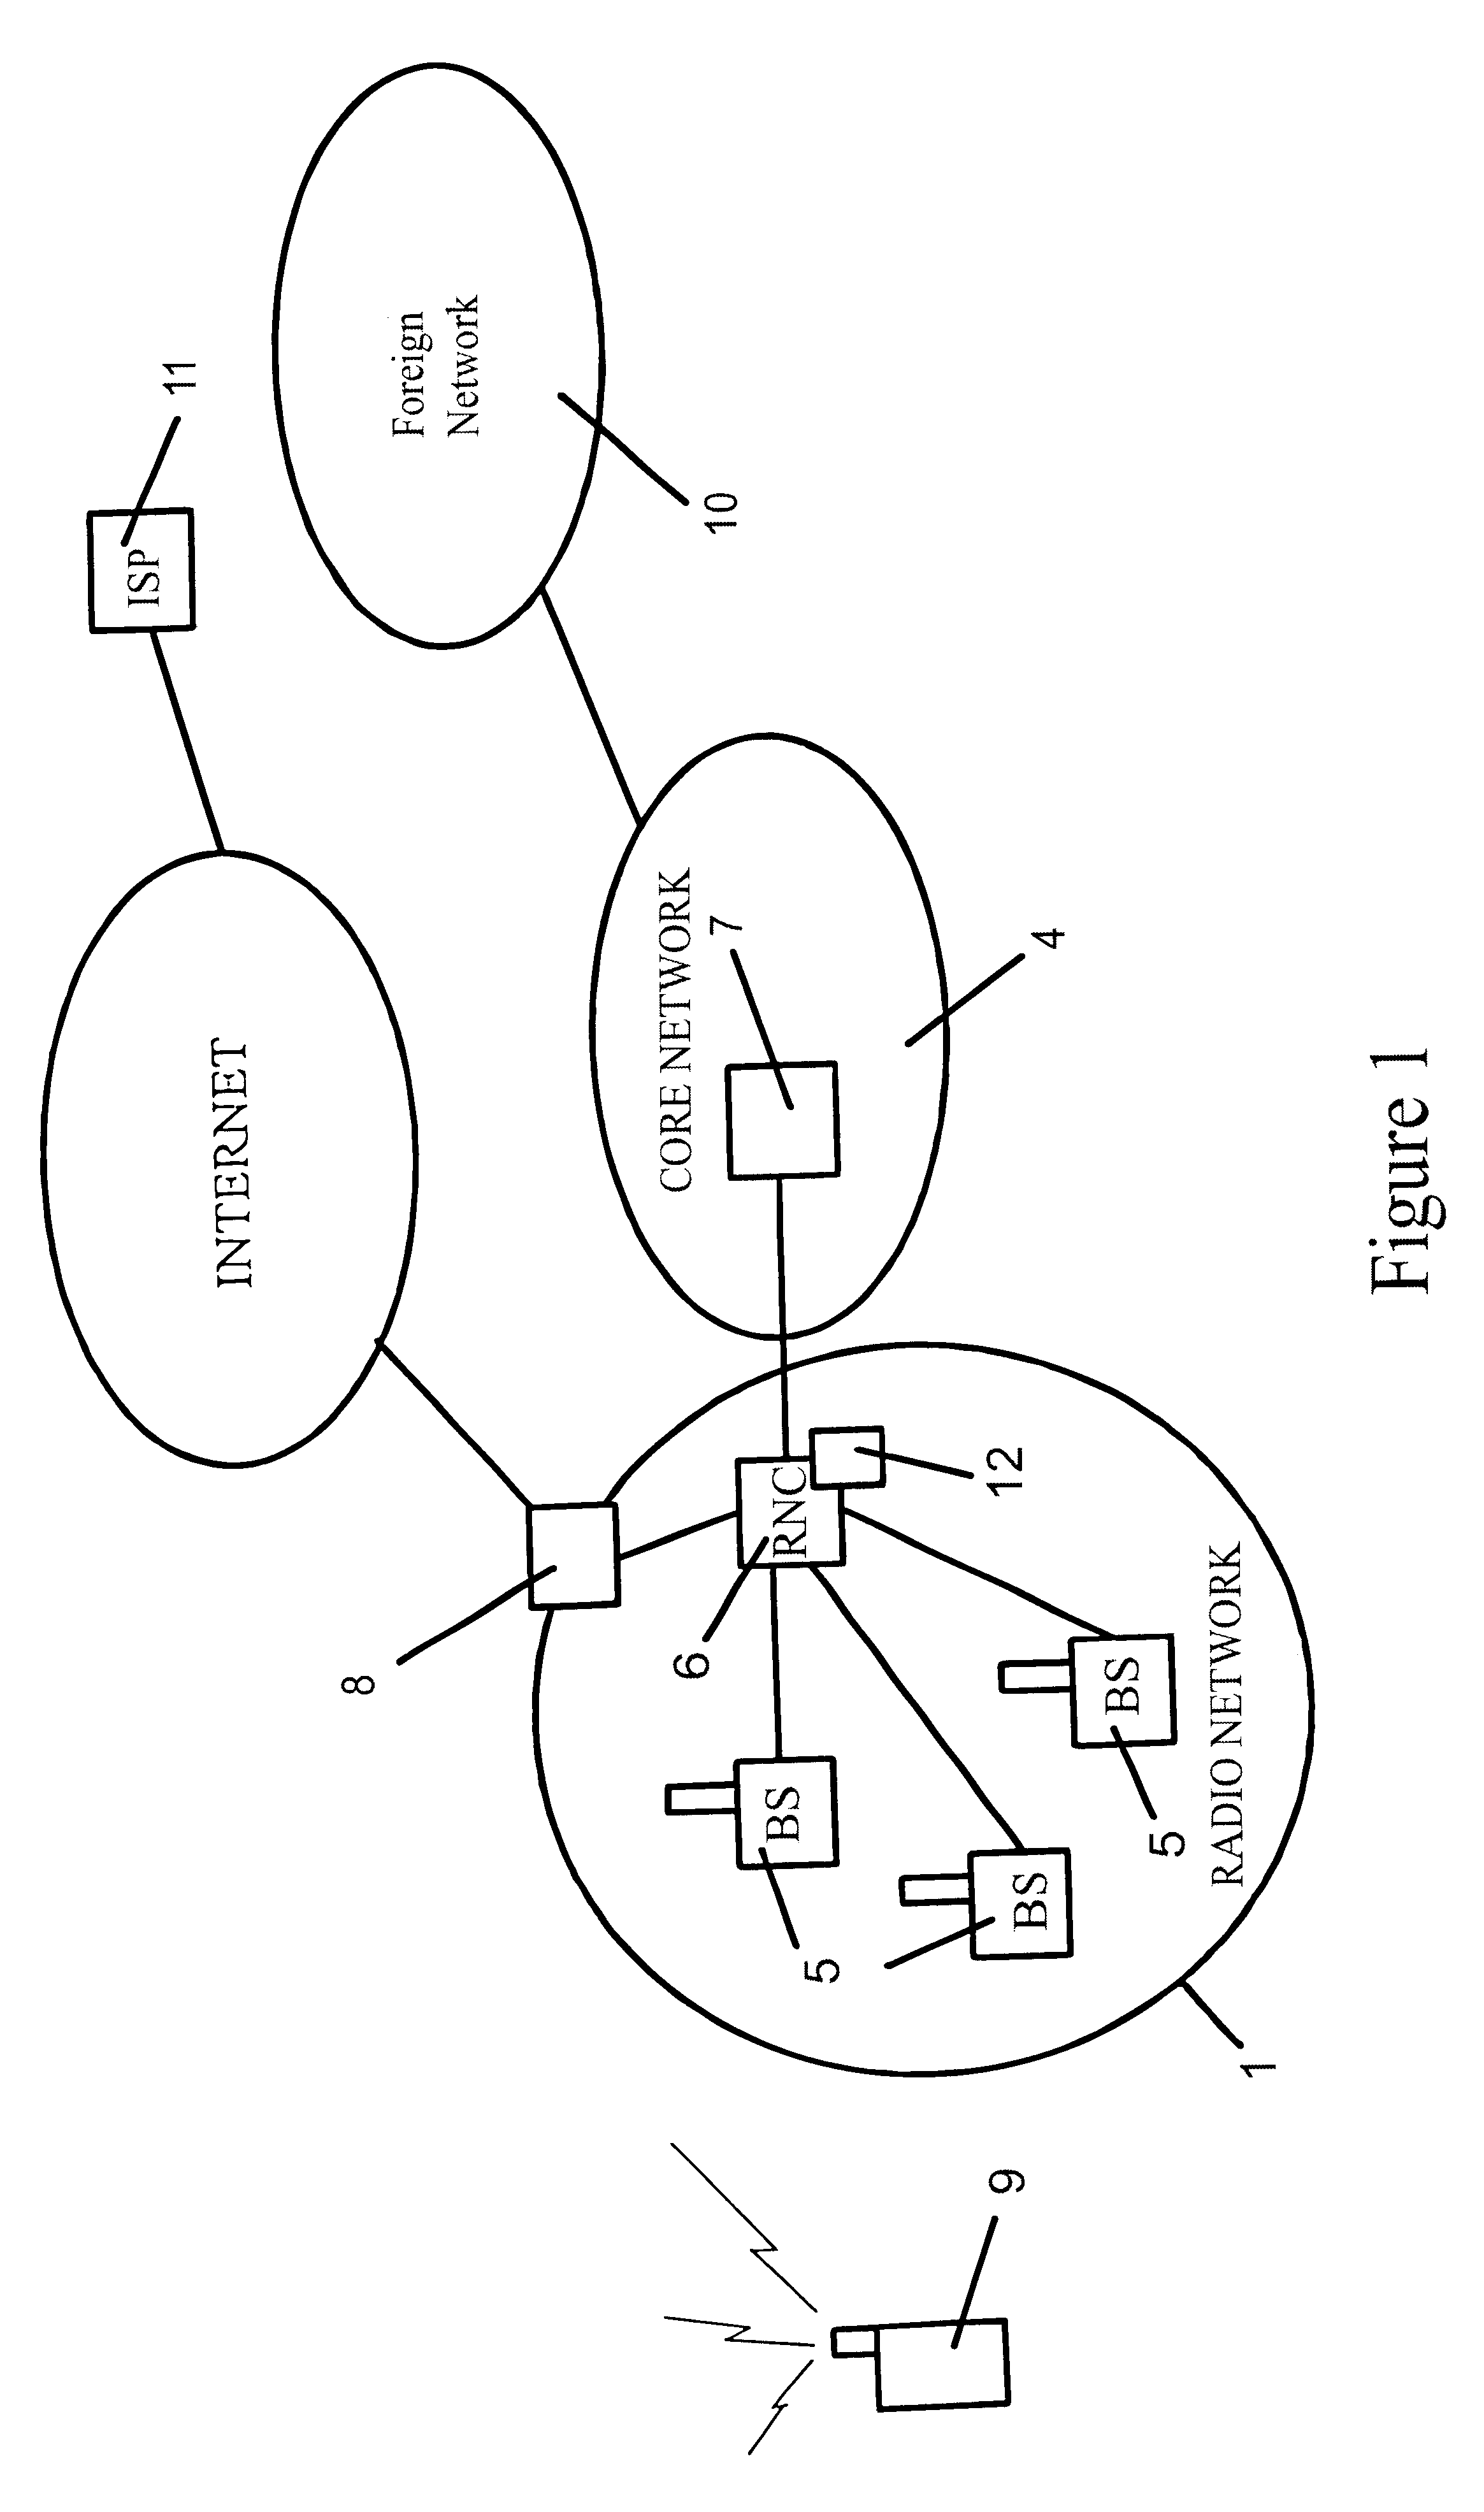 Mobile internet access system and method mapping mobile to internet service provider